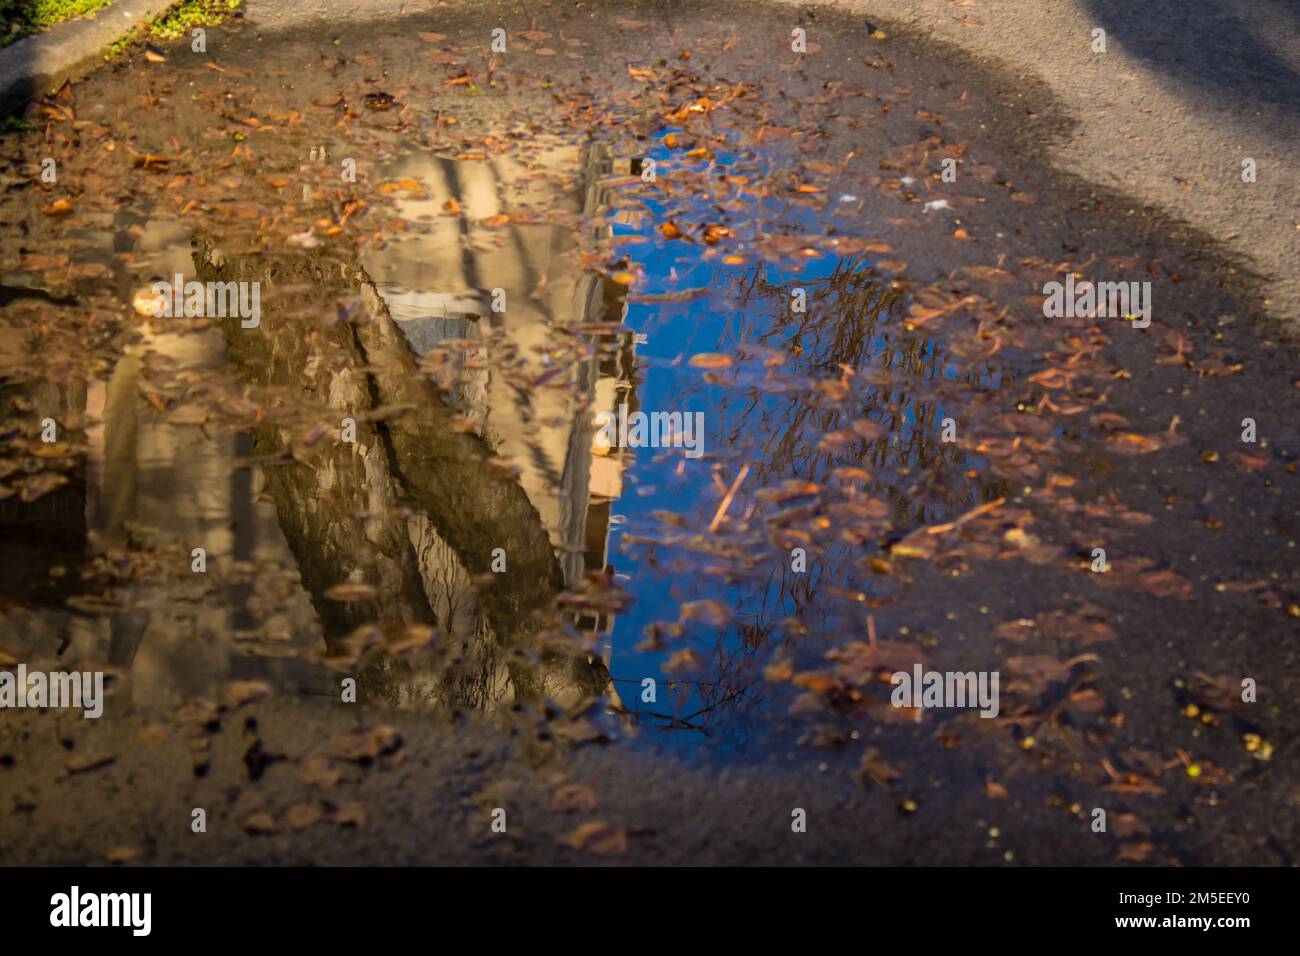 Reims, France - December 27, 2022 Reflection of the city environment in a puddle of water in the streets of Reims, Capital of Champagne in France Stock Photo